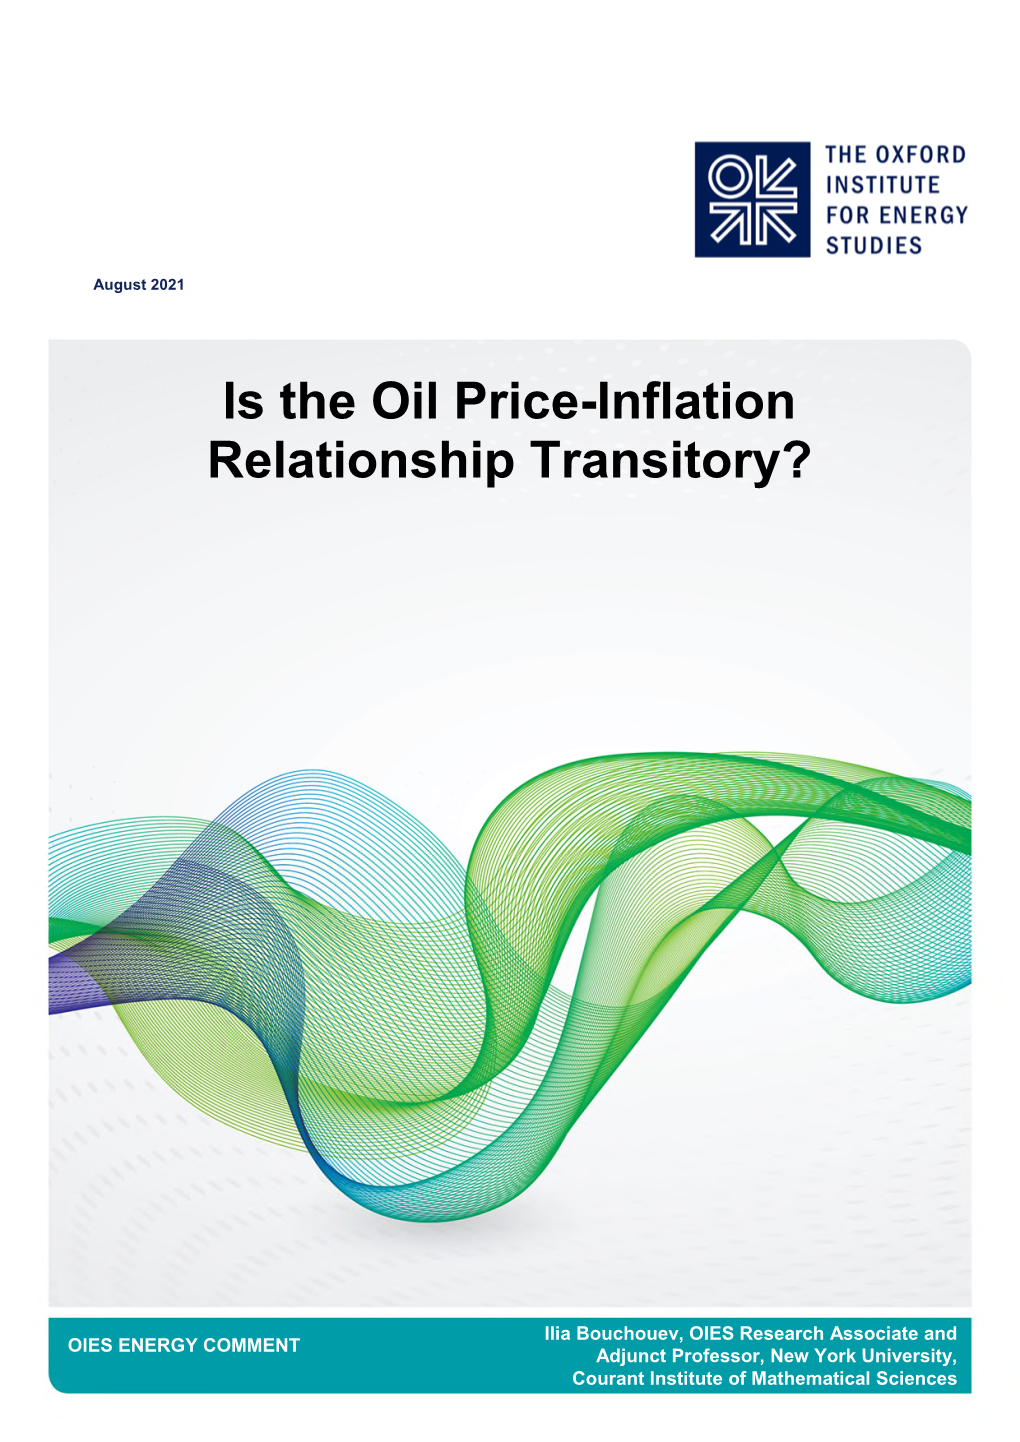 Is the Oil Price-Inflation Relationship Transitory?